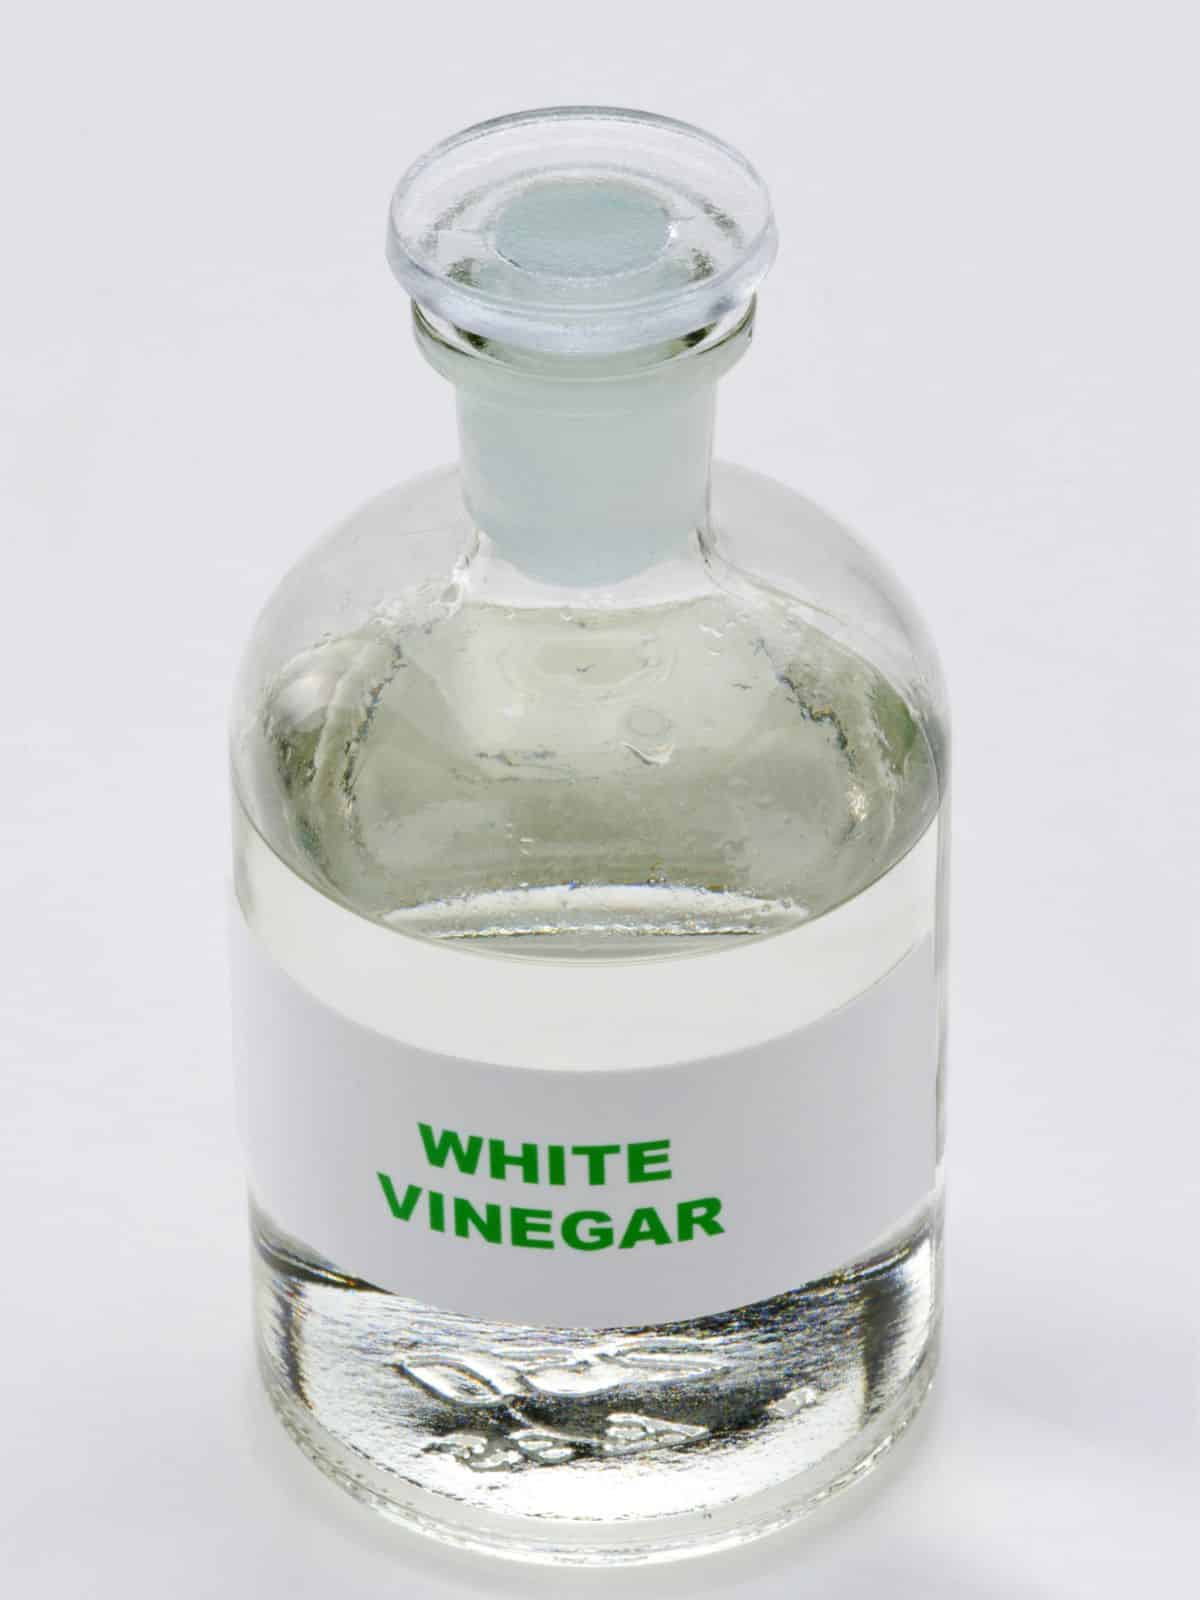 Bottle of white vinegar on a white surface, a solution for removing milk stains from carpet.